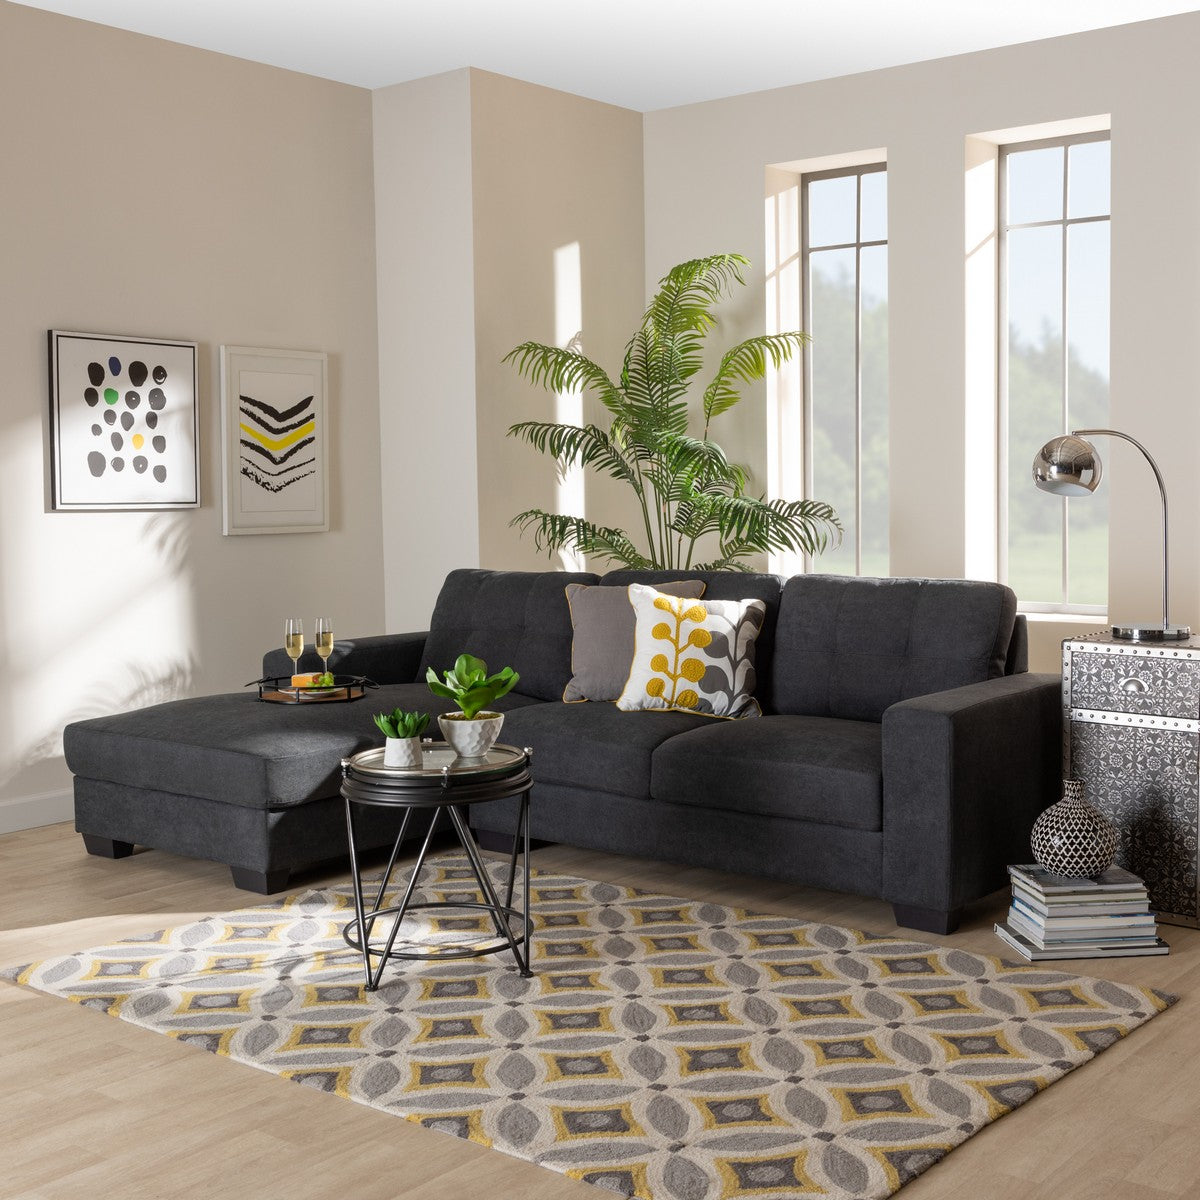 Baxton Studio Langley Modern and Contemporary Dark Grey Fabric Upholstered Sectional Sofa with Left Facing Chaise